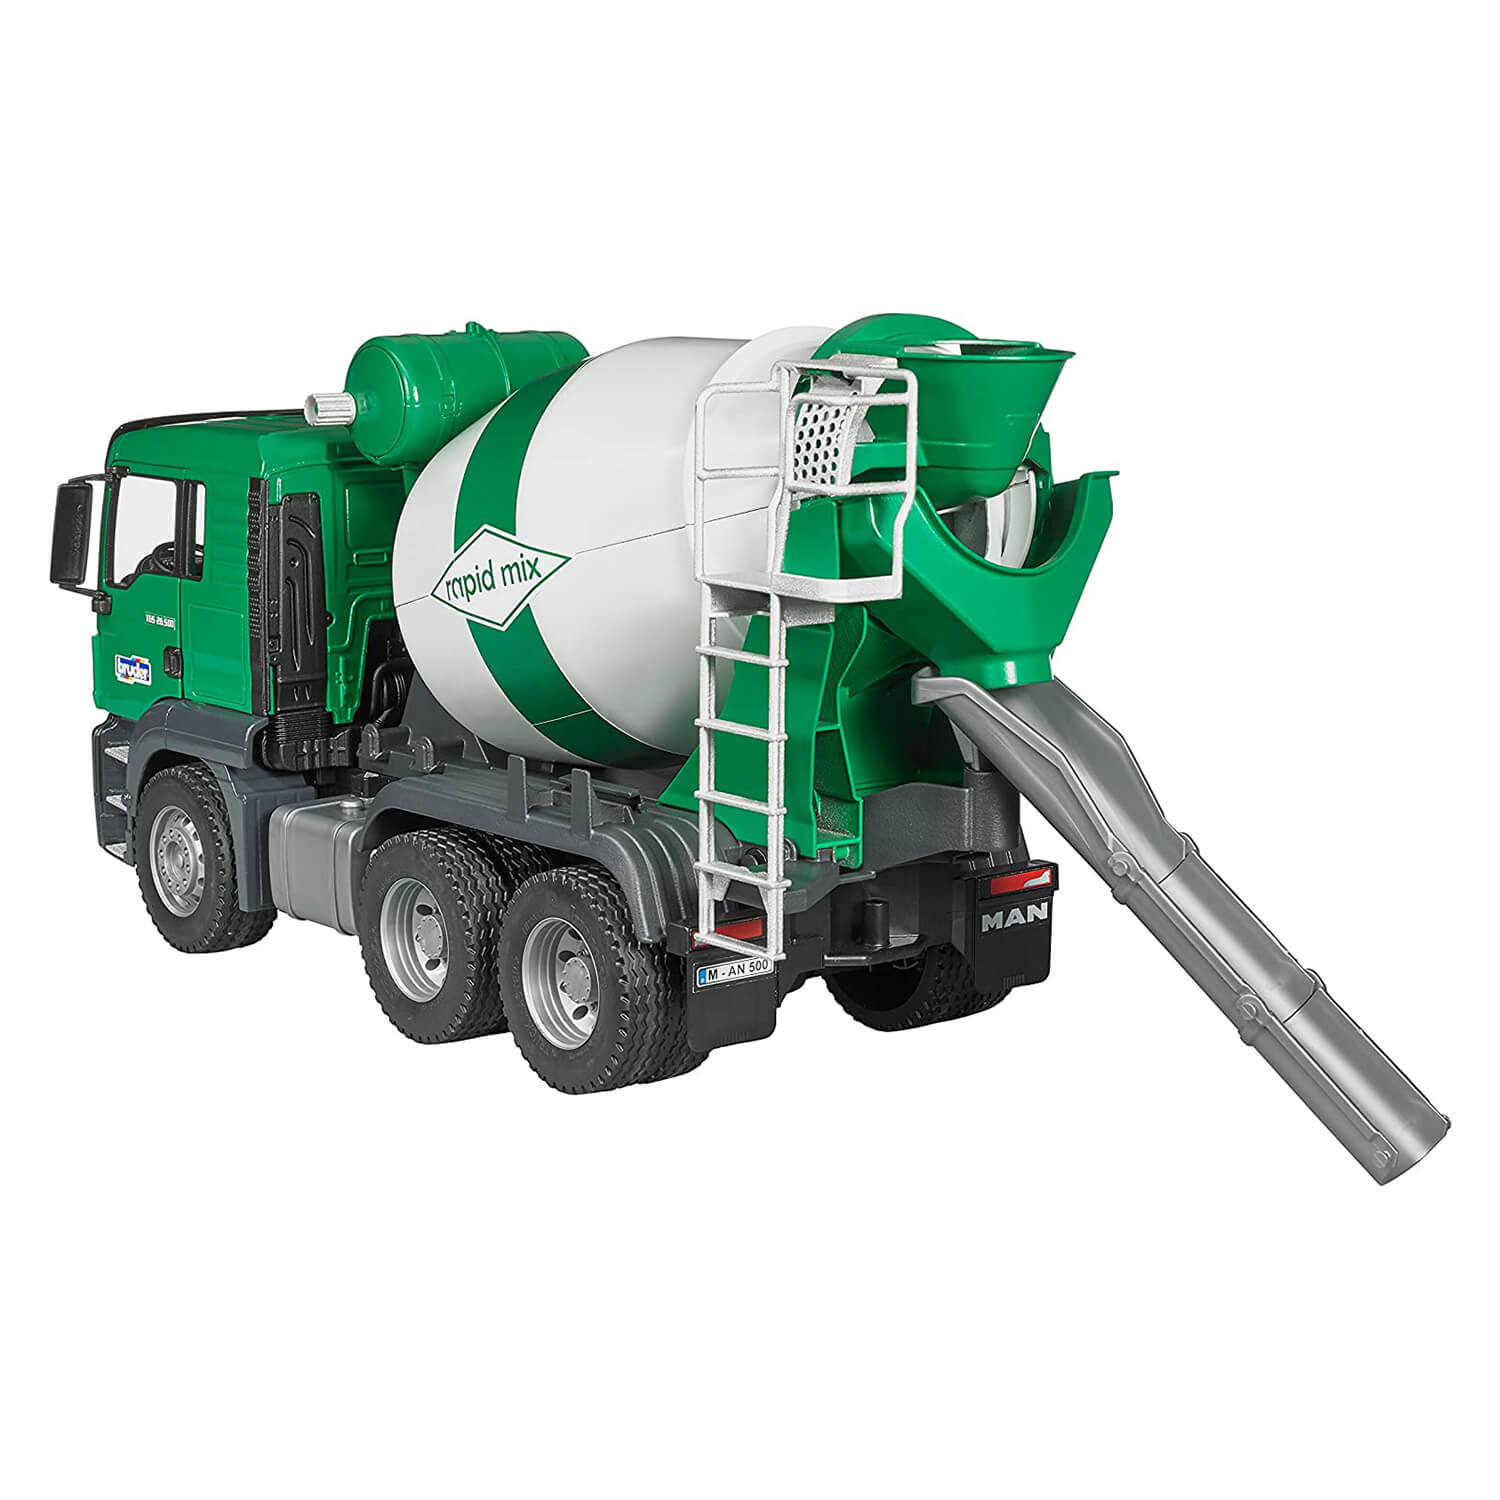 Back view of the Bruder Pro Series Man TGS Cement Mixer 1:16 Scale Vehicle.